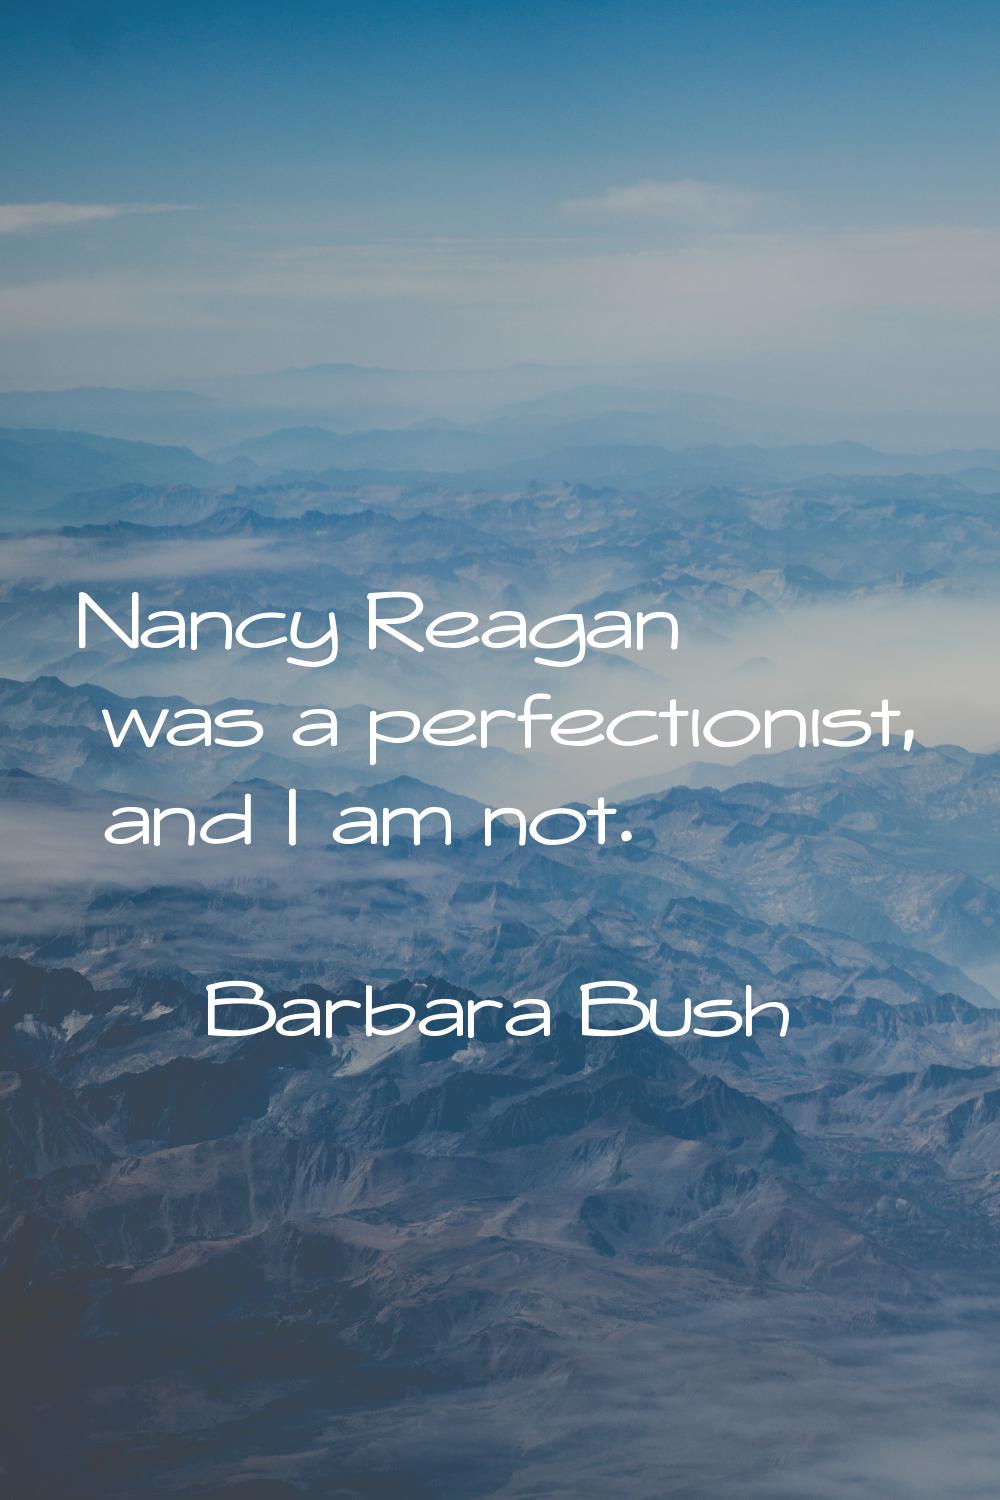 Nancy Reagan was a perfectionist, and I am not.